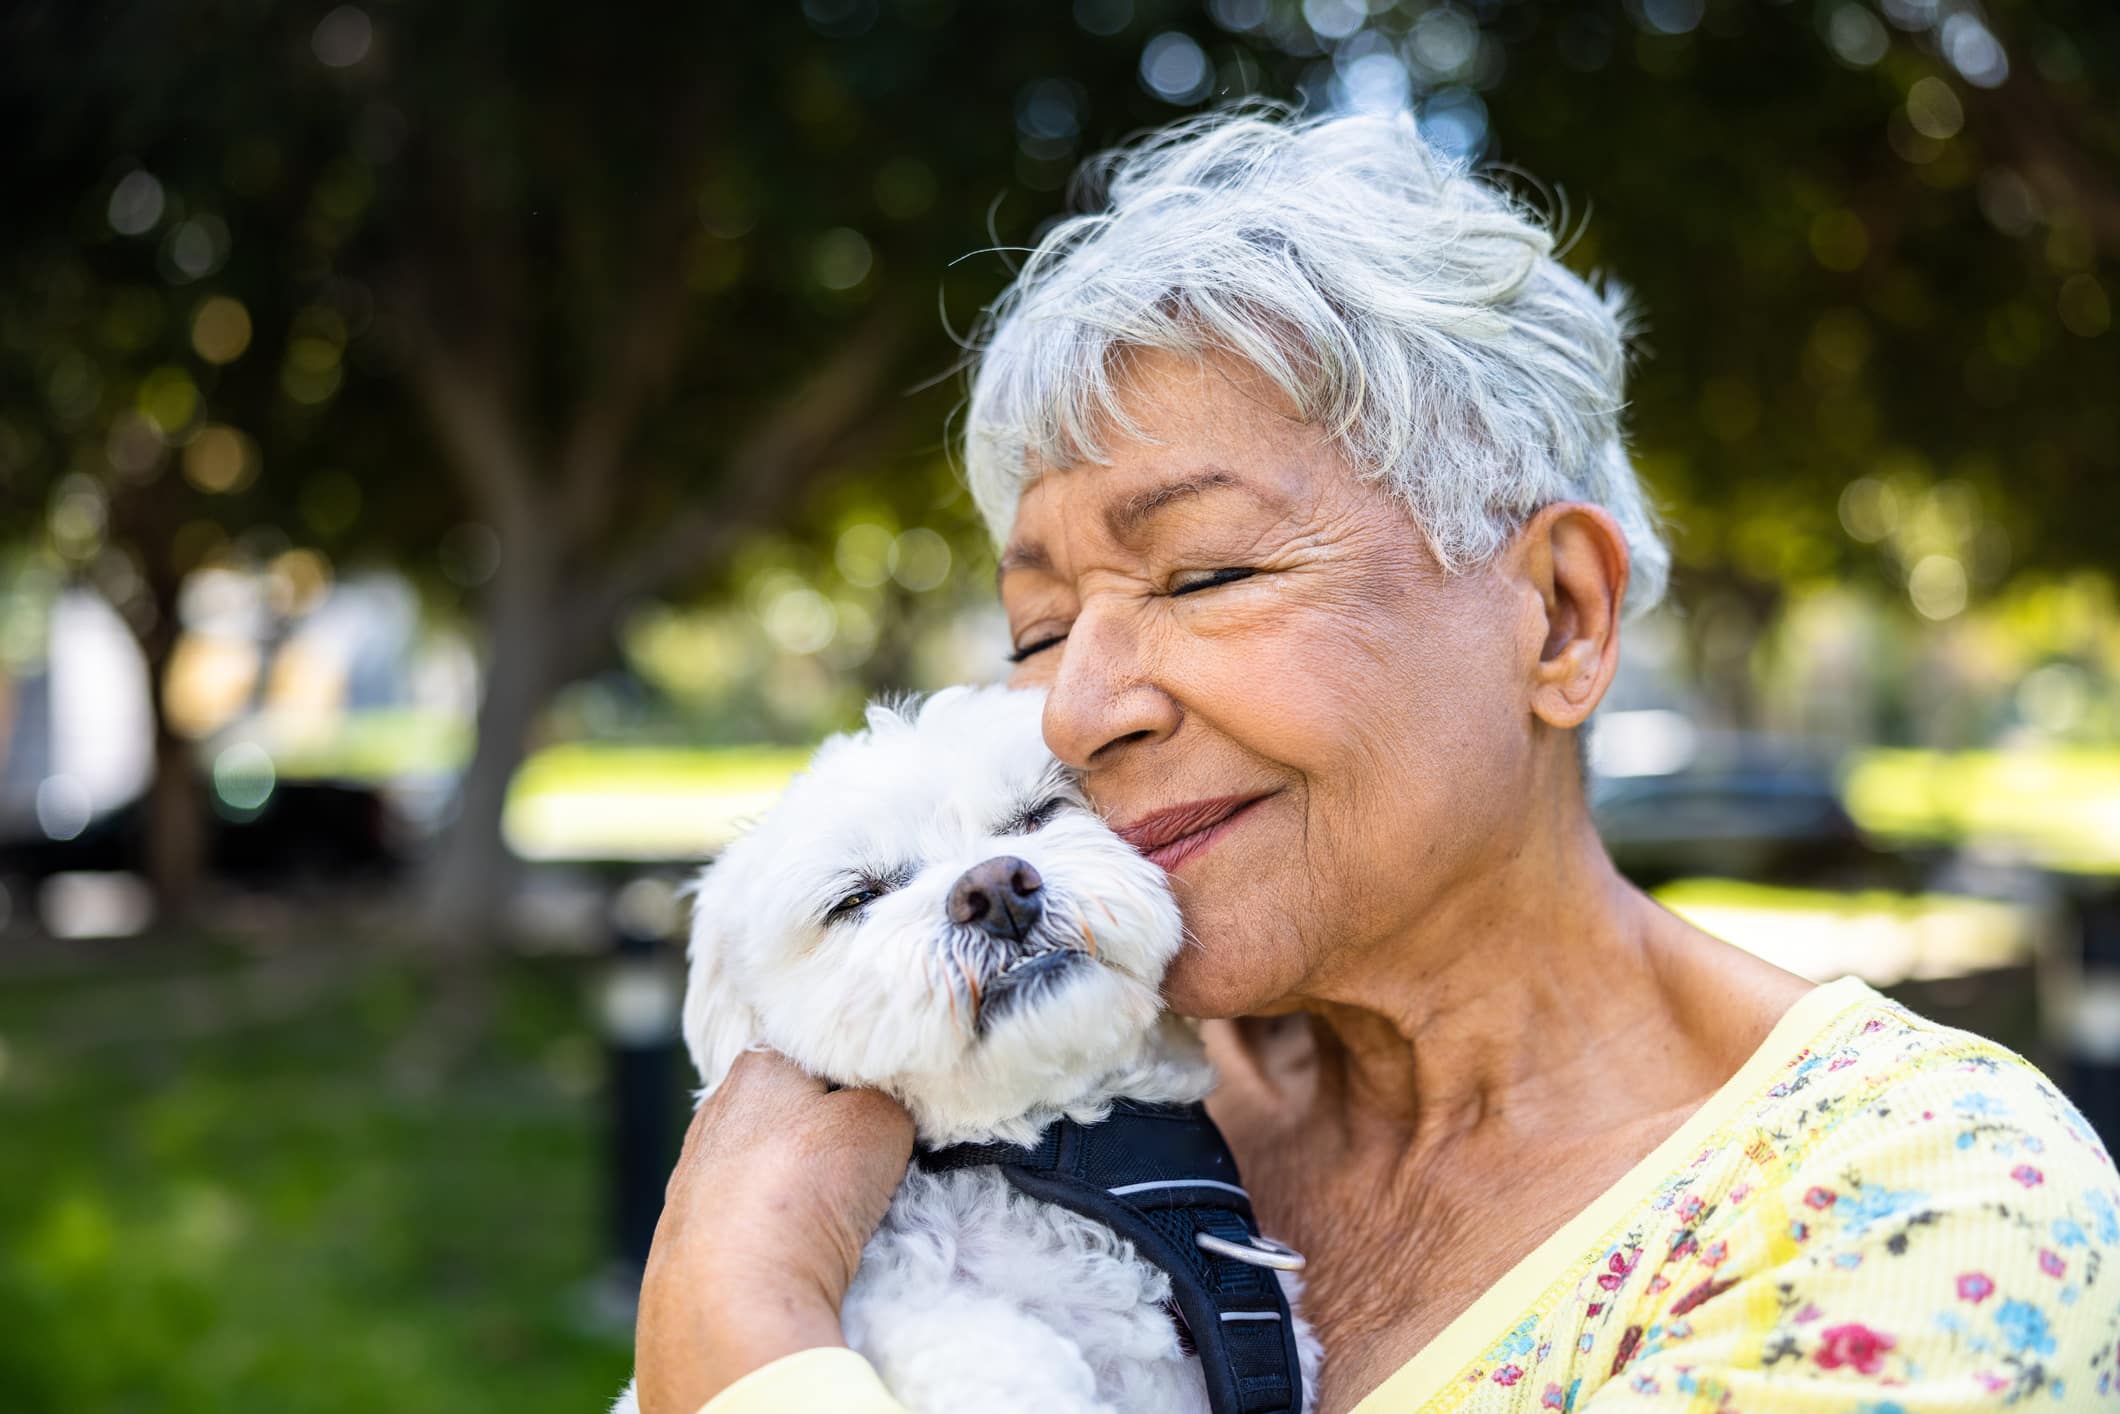 A mixed race senior woman holding her puppy outdoors